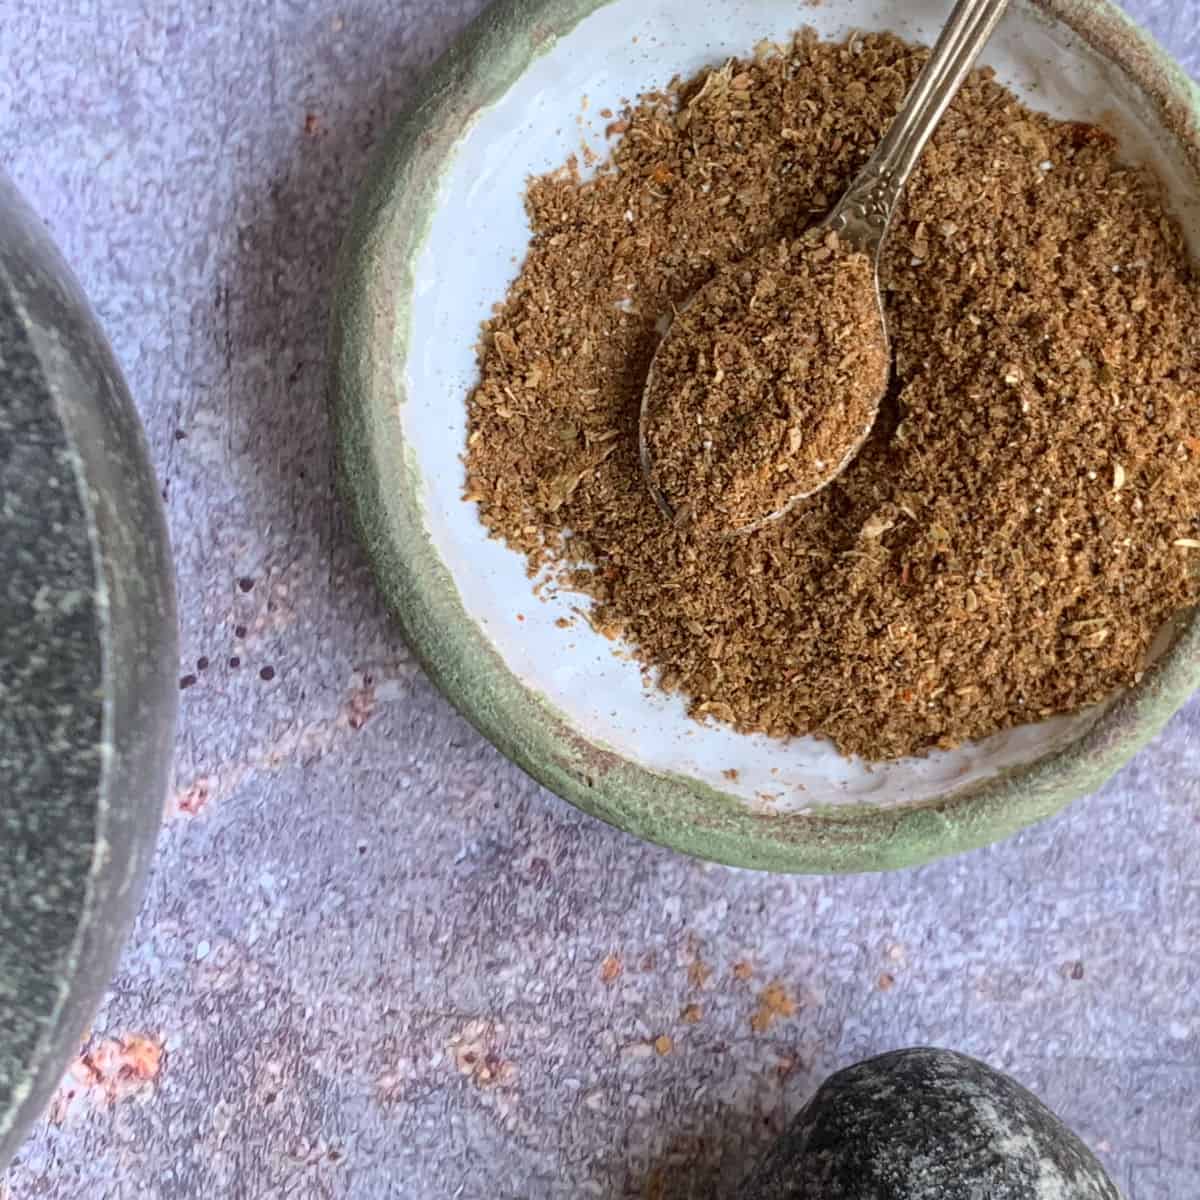 Toasted spices ready to grind.